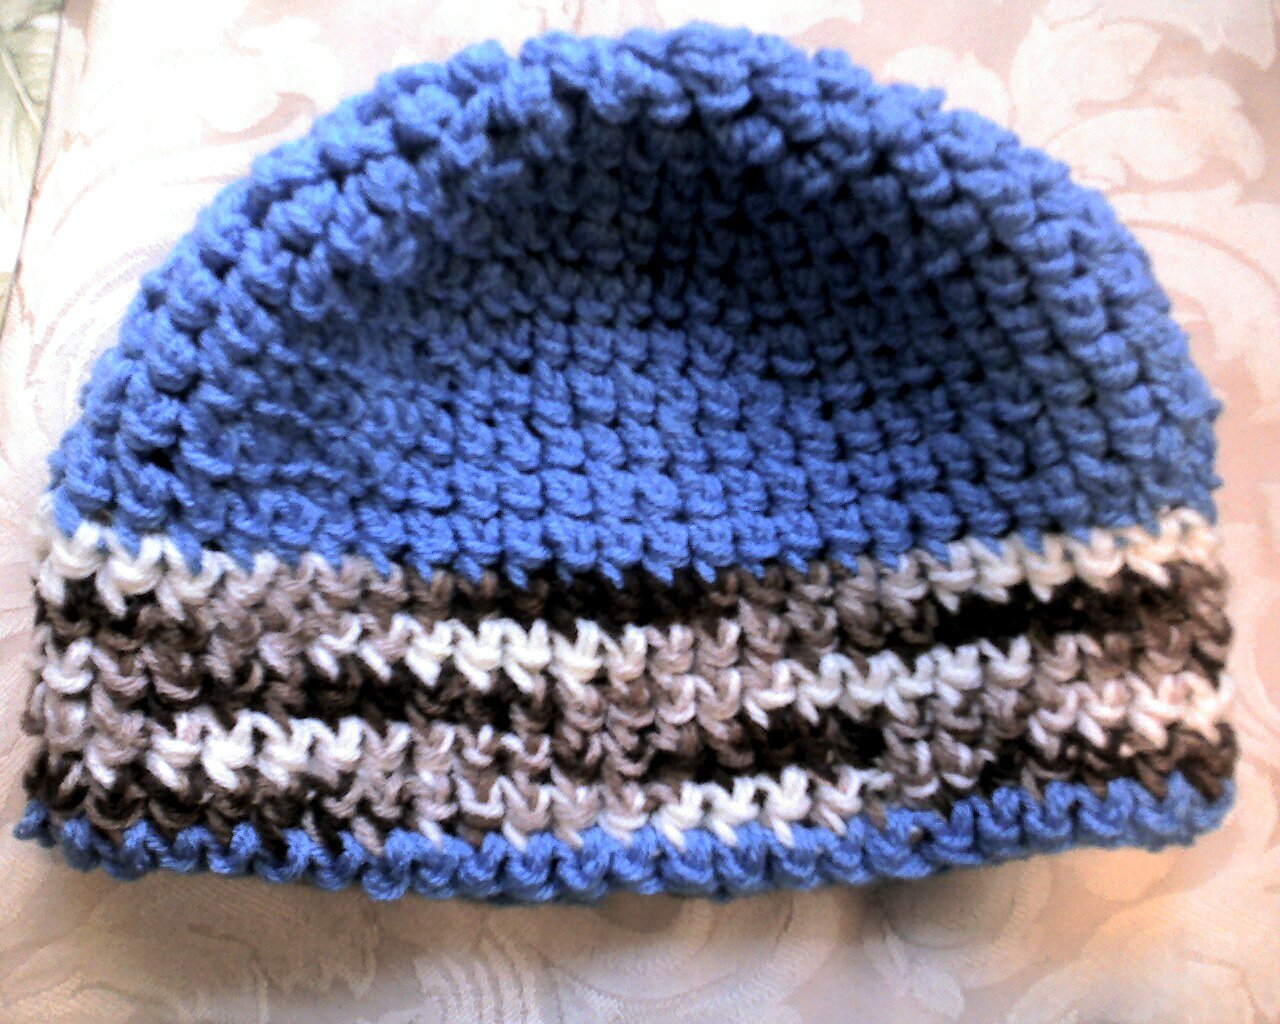 First hat made